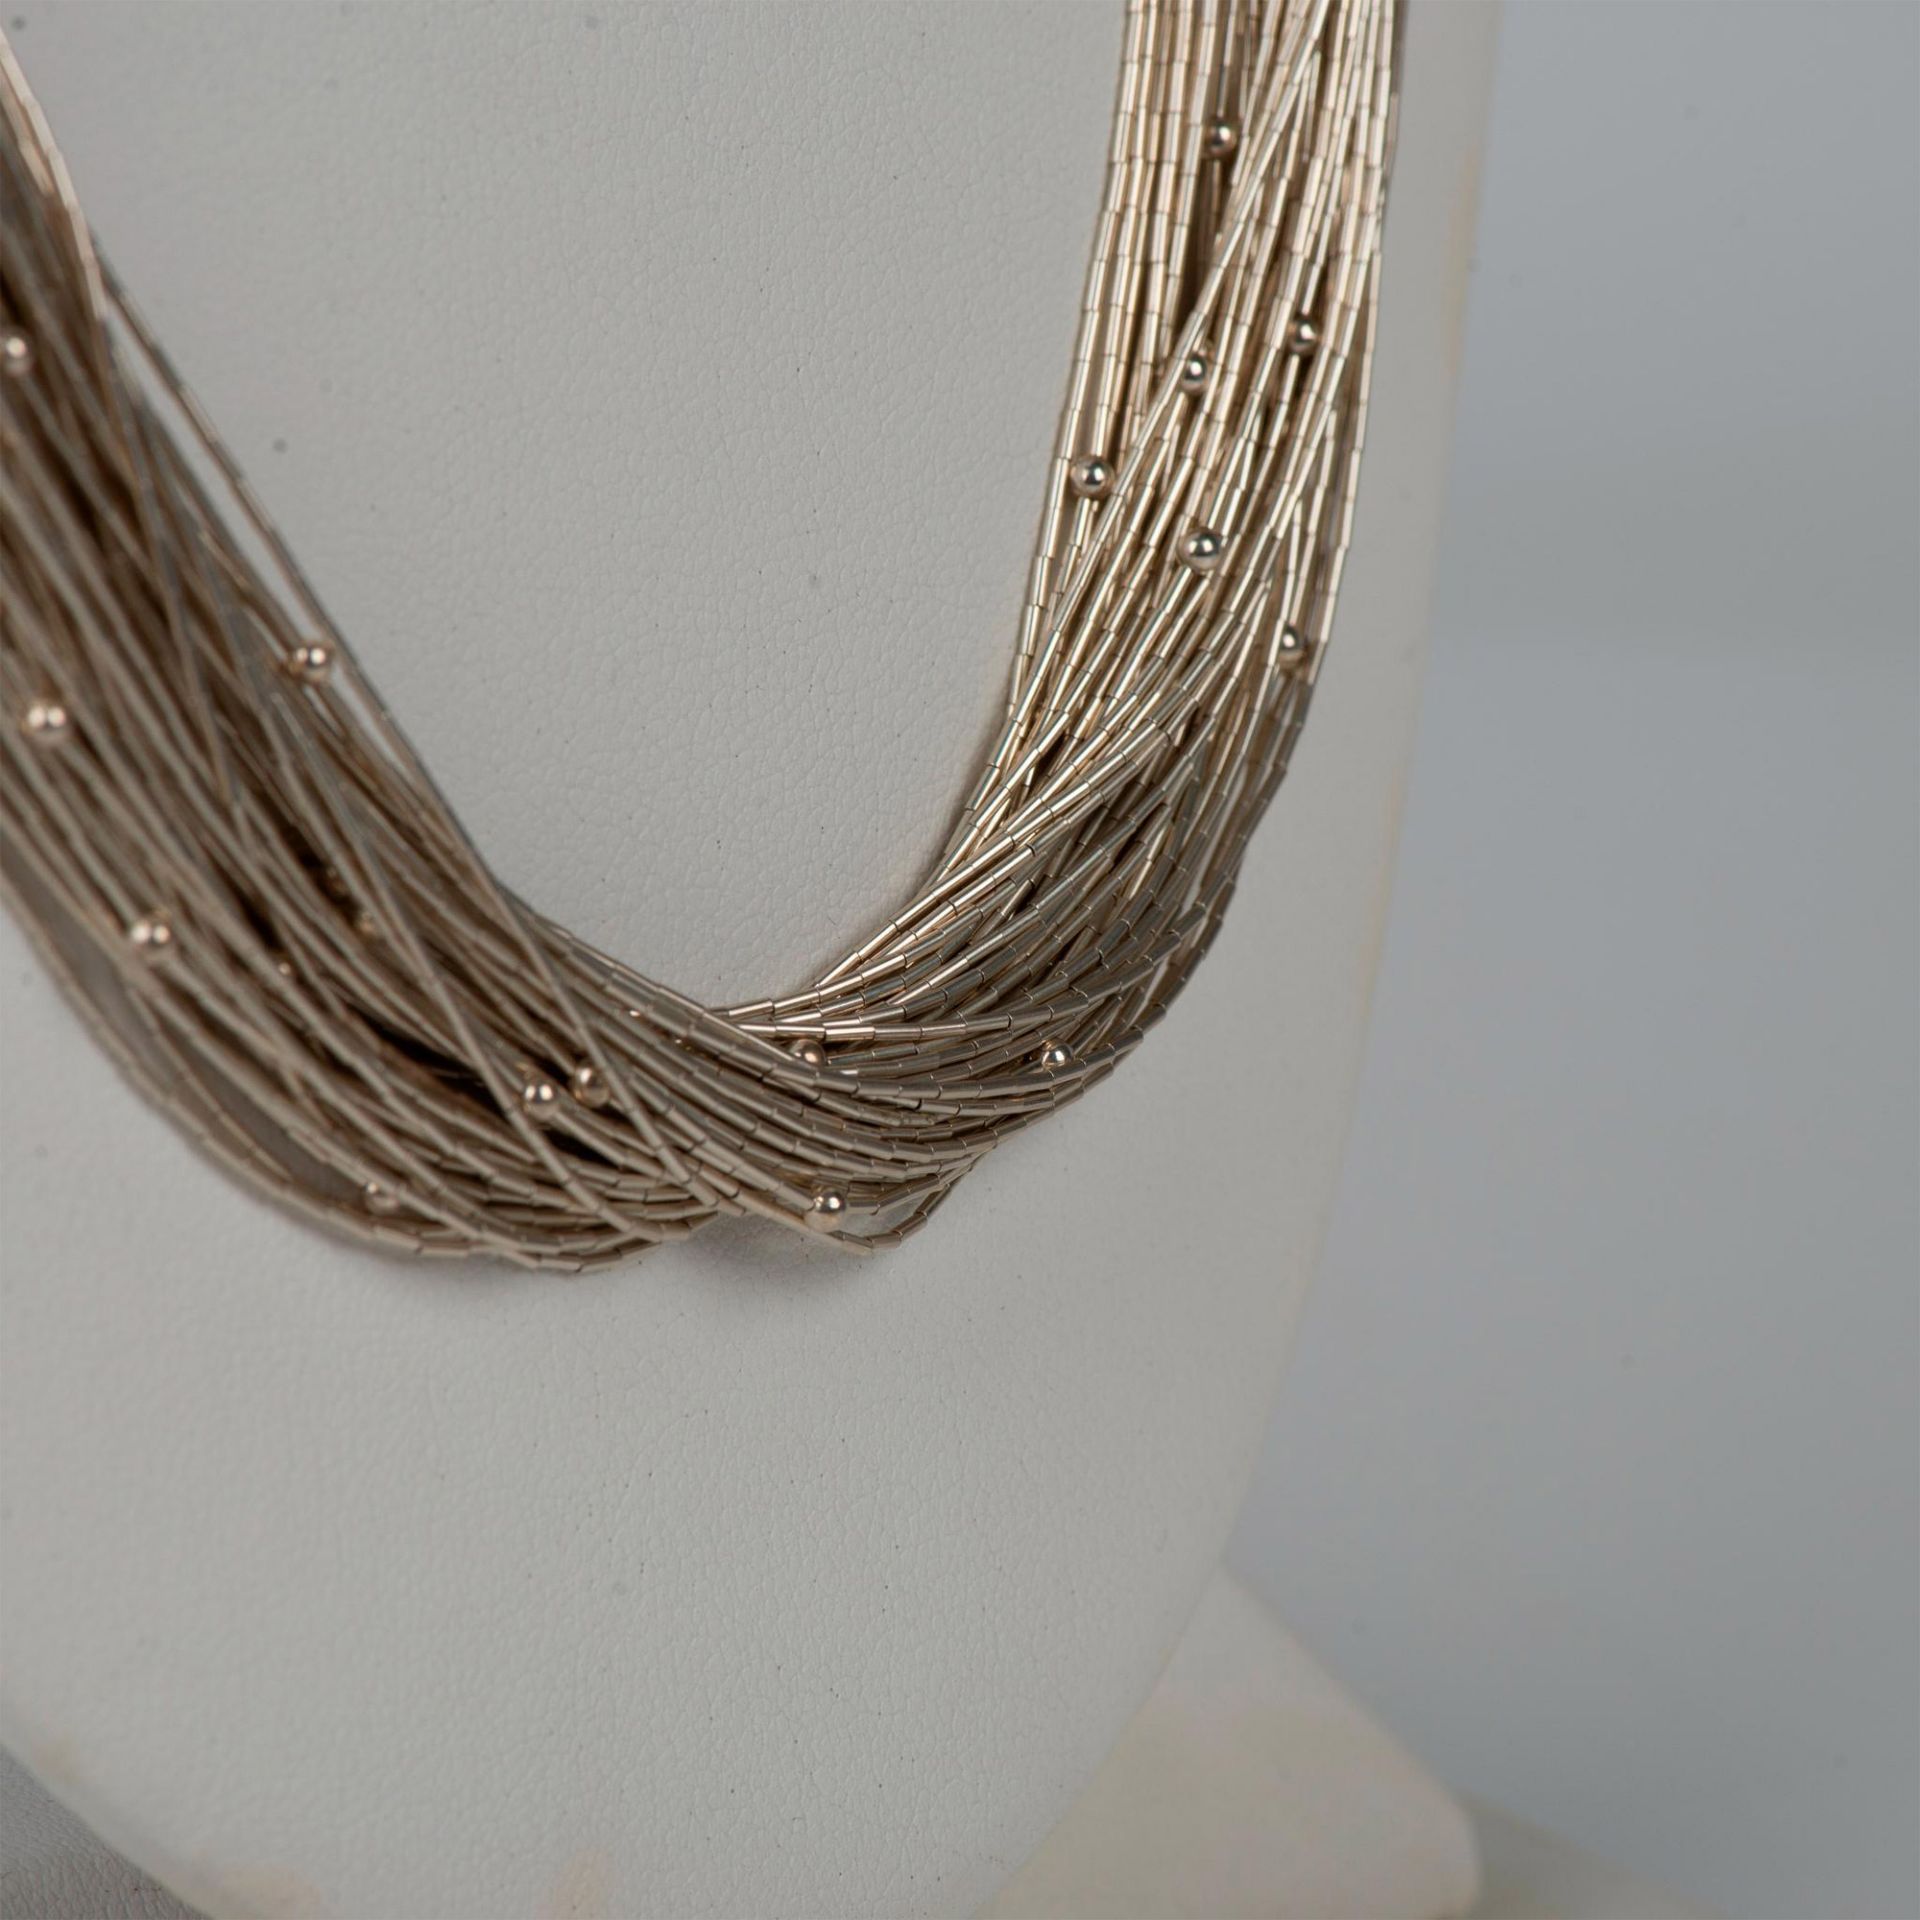 Fancy Multi-Strand Sterling Silver Bead Necklace - Image 2 of 4